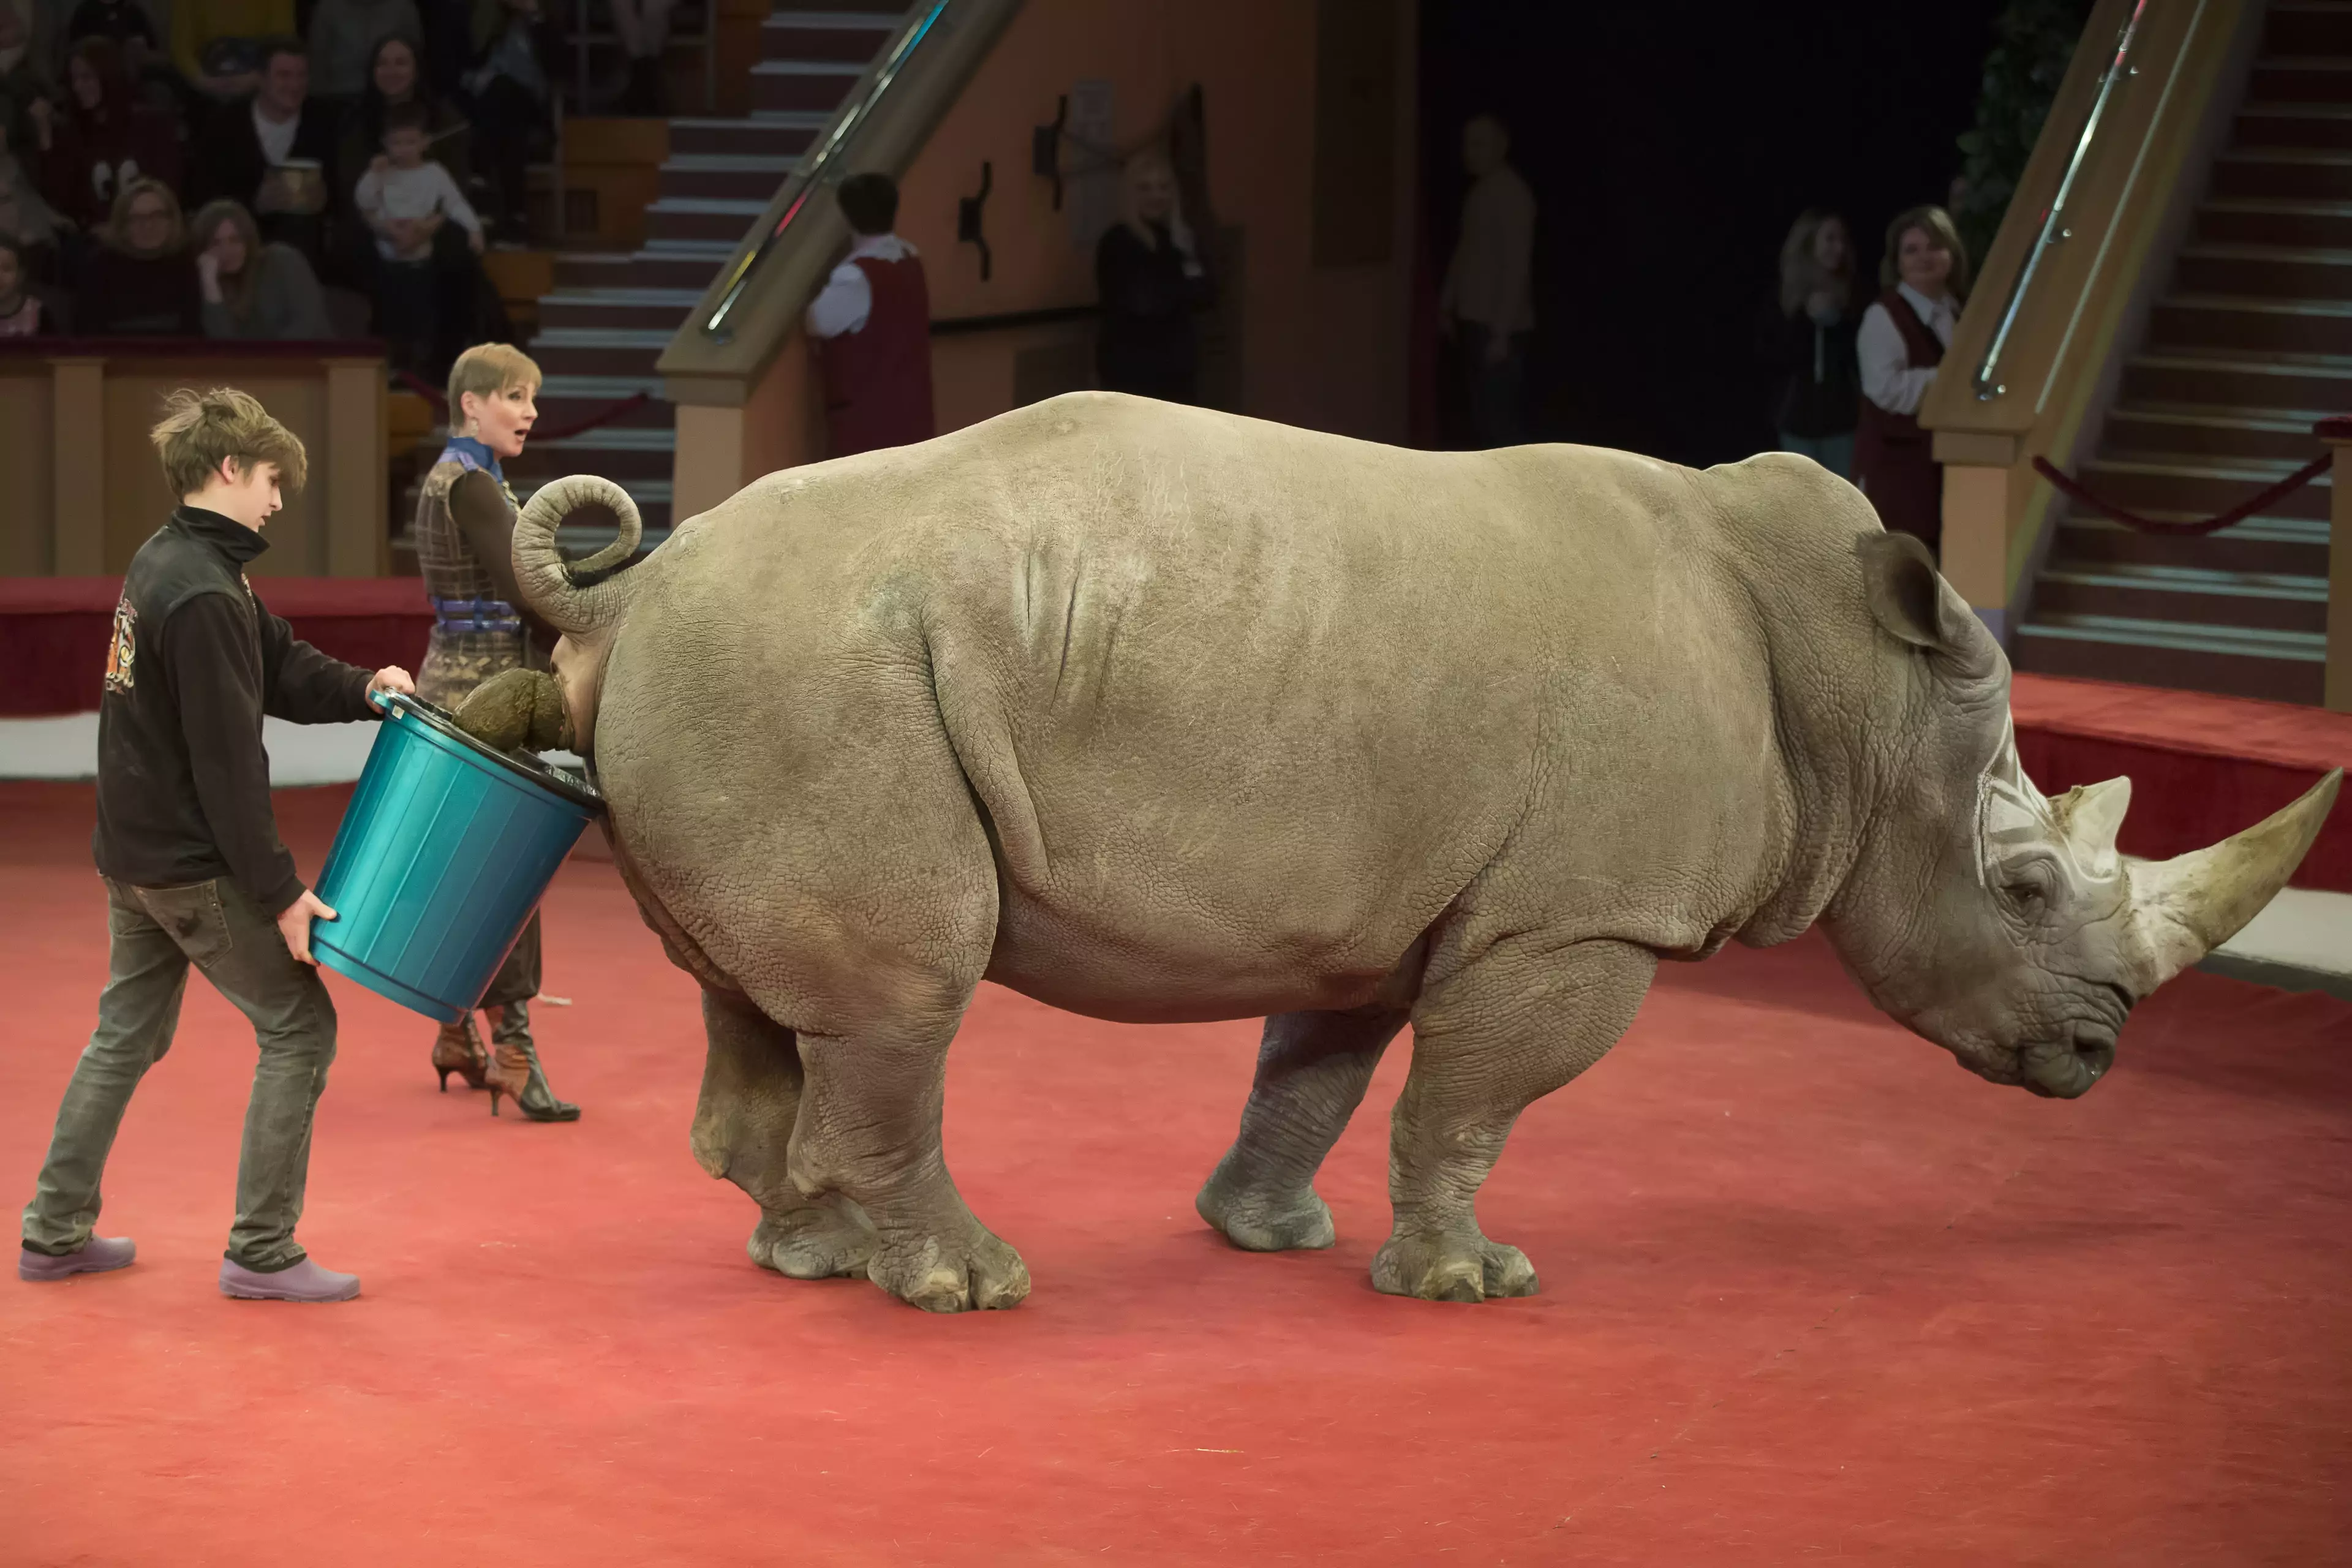 A circus rhino illustrates its stance on the matter.